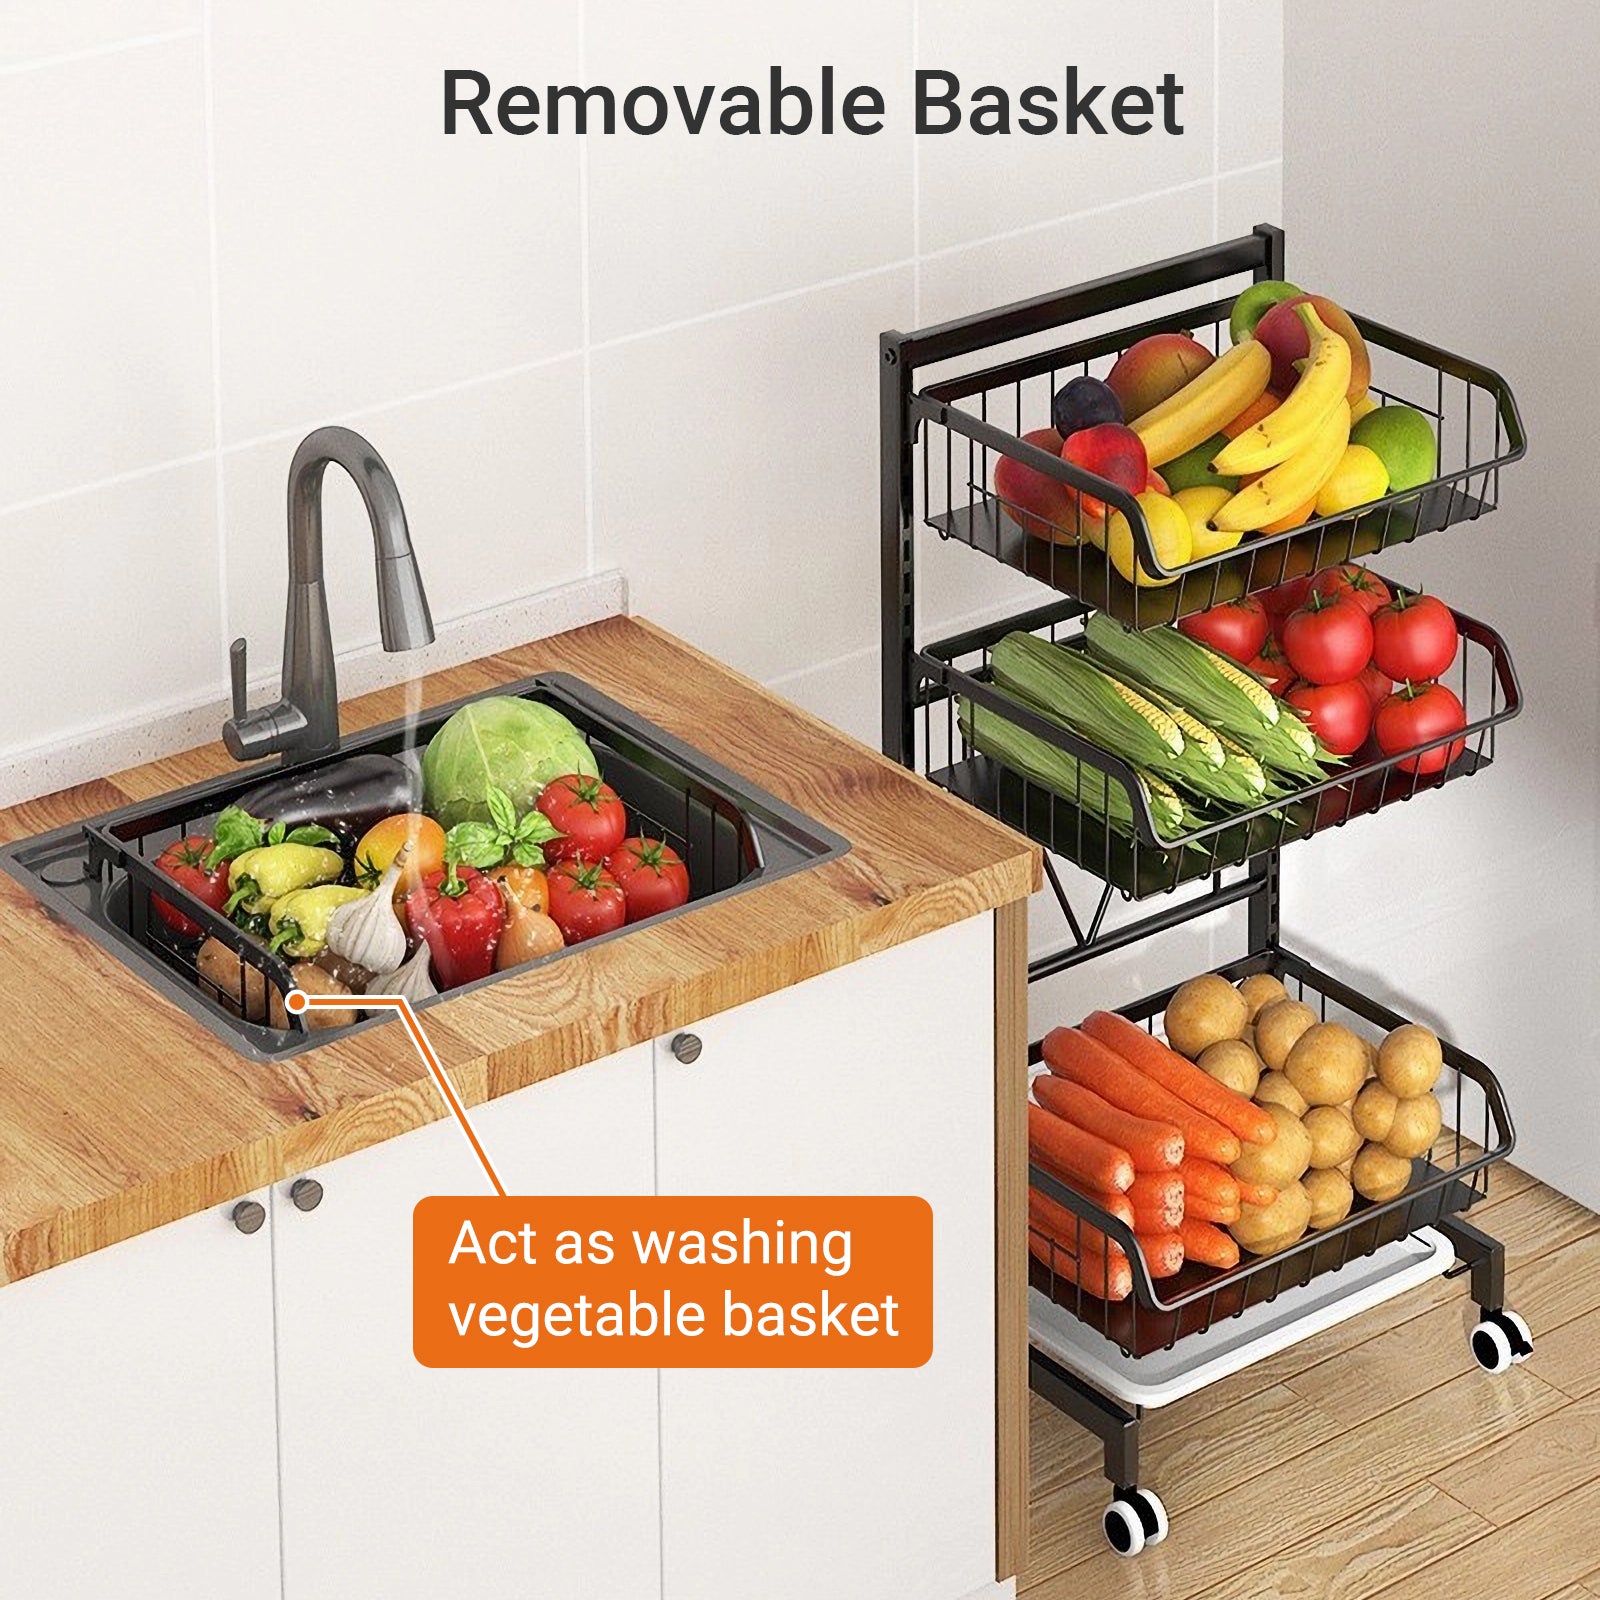 Todeco-Fruit-and-Vegetable-Basket-with-Wheels-Vegetable-Rack-for-Kitchen-4-Tiers-Storage-Cart-with-Locking-Casters-for-Kitchen-Fruits-Vegetables-Fruit-and-Vegetable-Basket-with-Wheels-4-Tiers-Storage-Cart